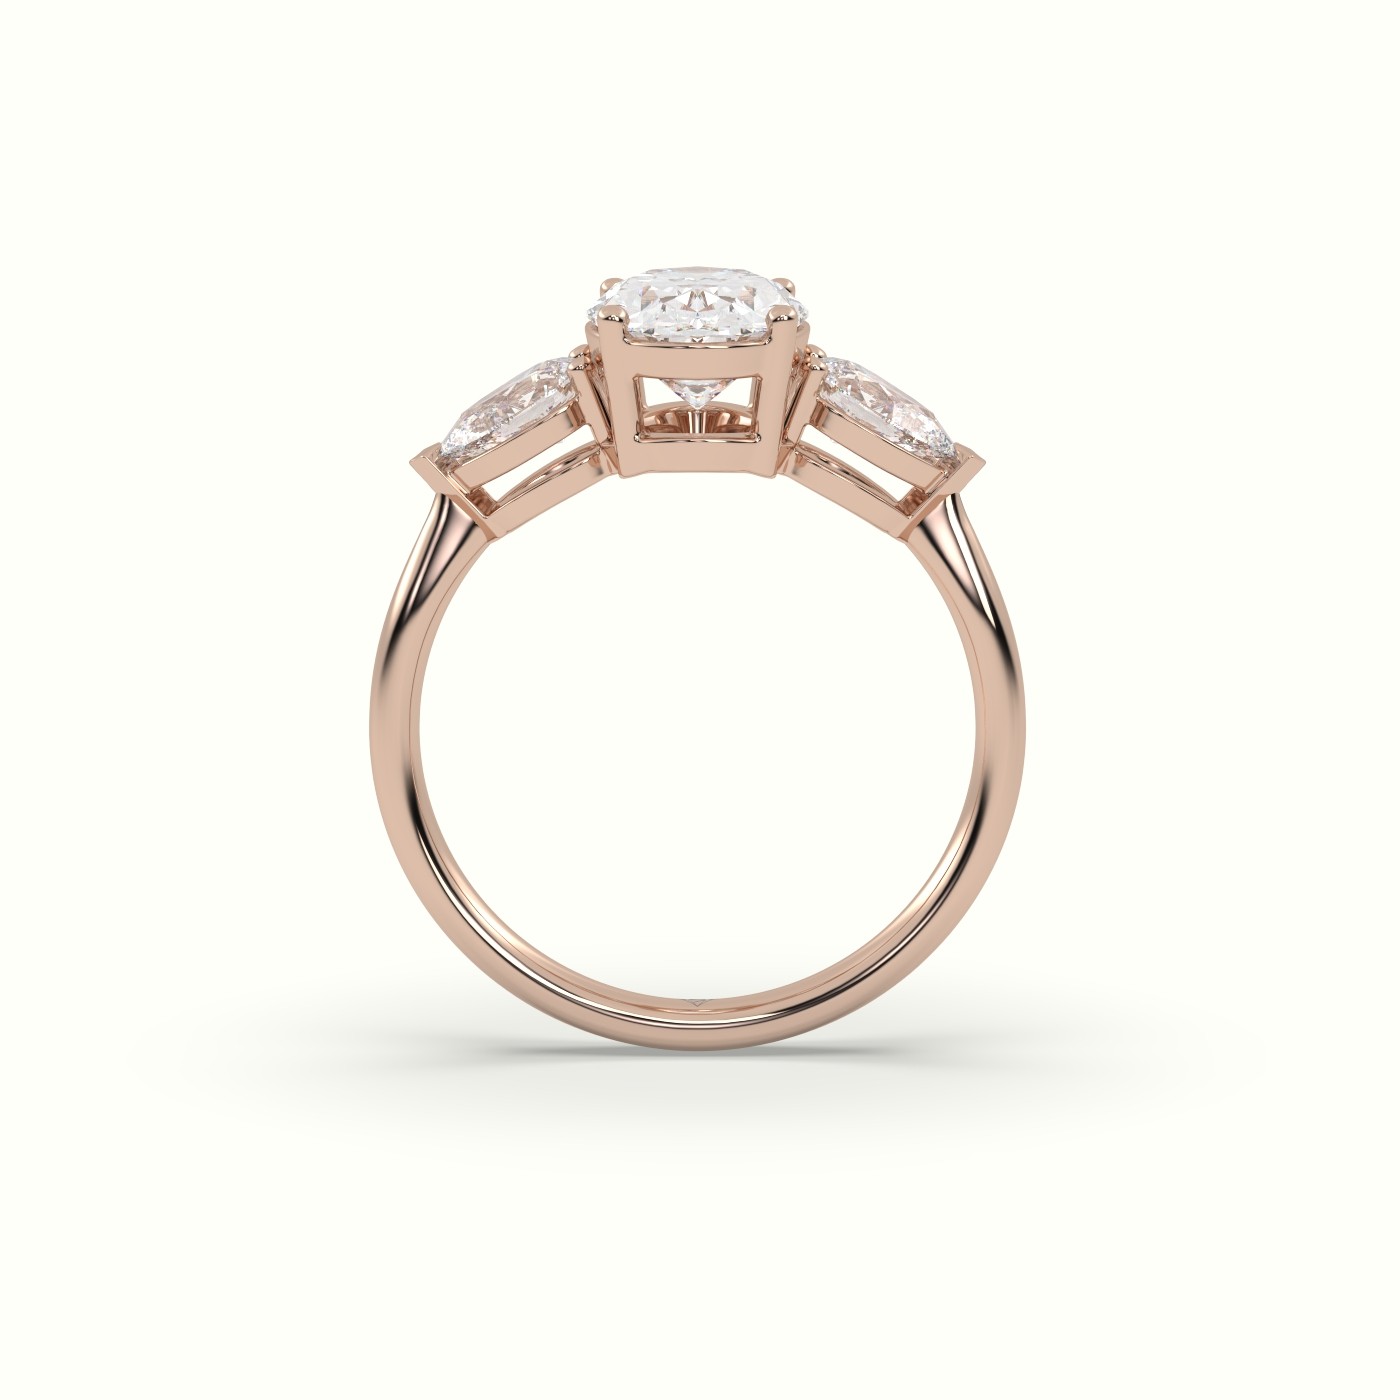 18K ROSE GOLD Oval Diamond 4 round prongs Trilogy Ring pear shape side stone | Precious Jewels Antwerp